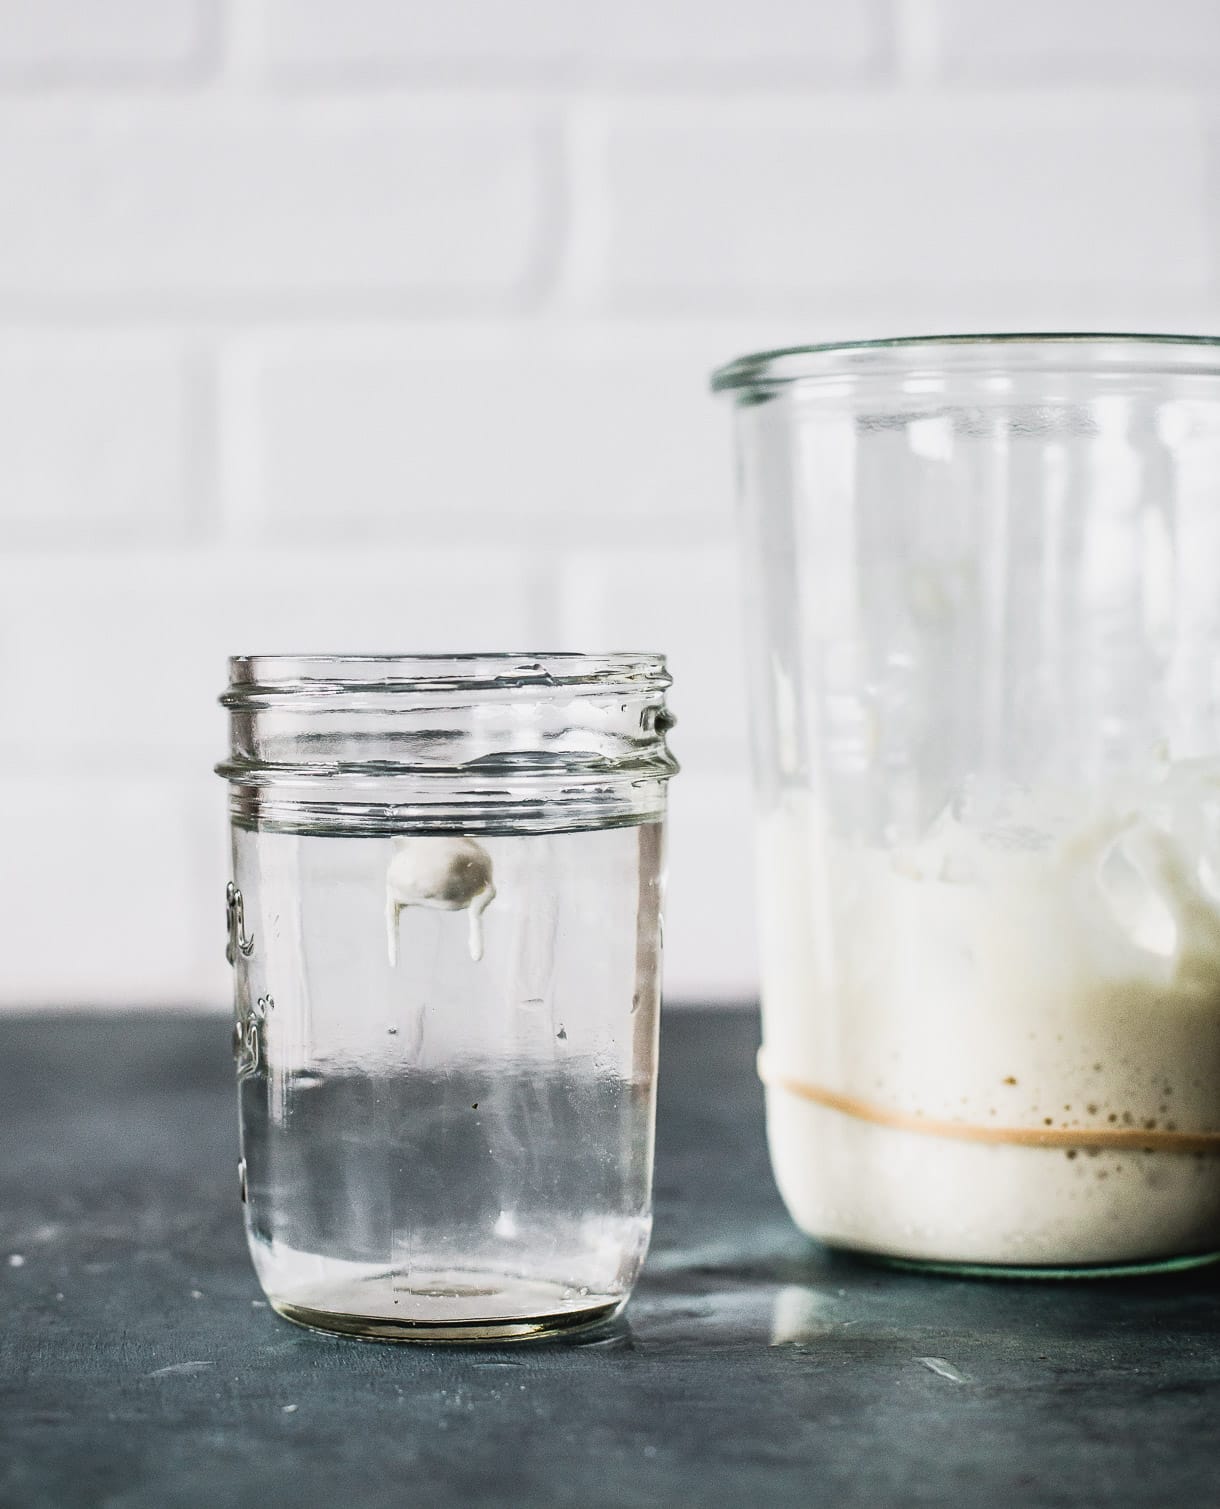 Top 5 Sourdough Starter Tips // when is my starter ready to bake with?